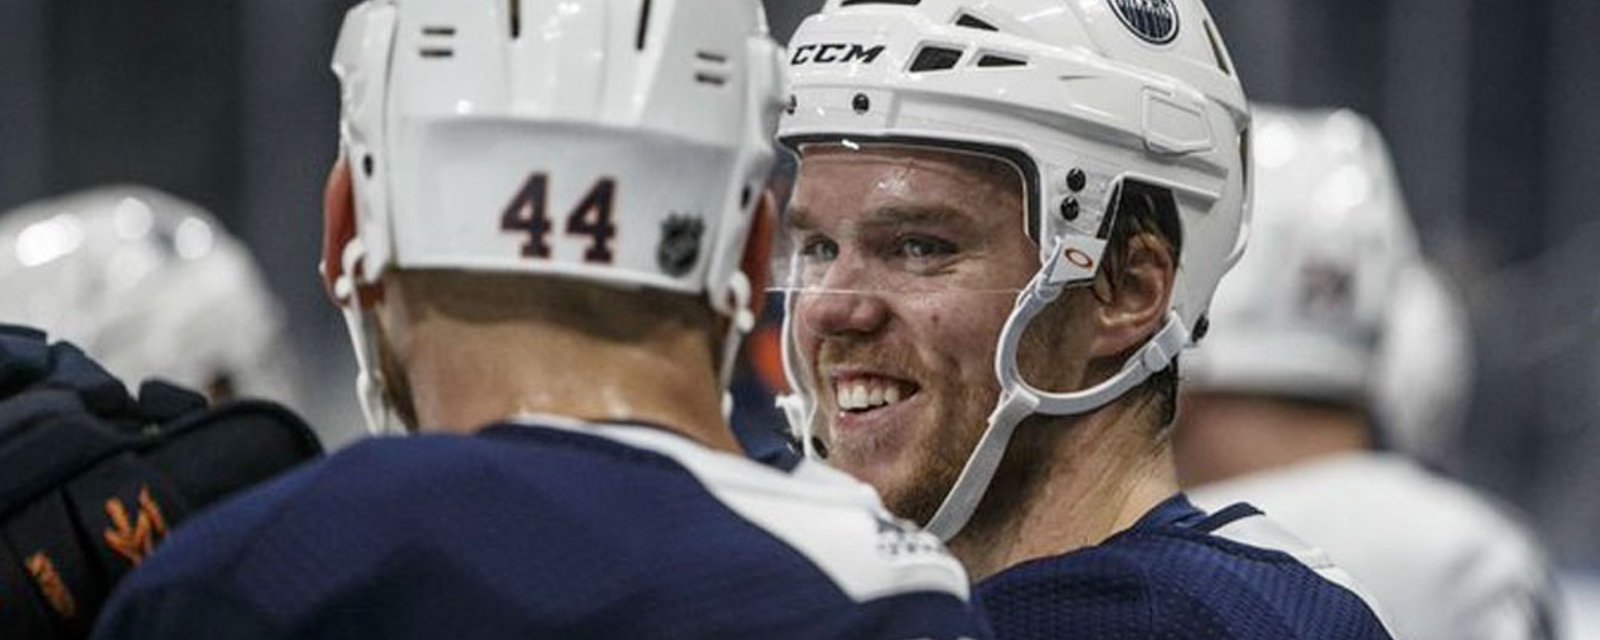 Report: McDavid cleared to play